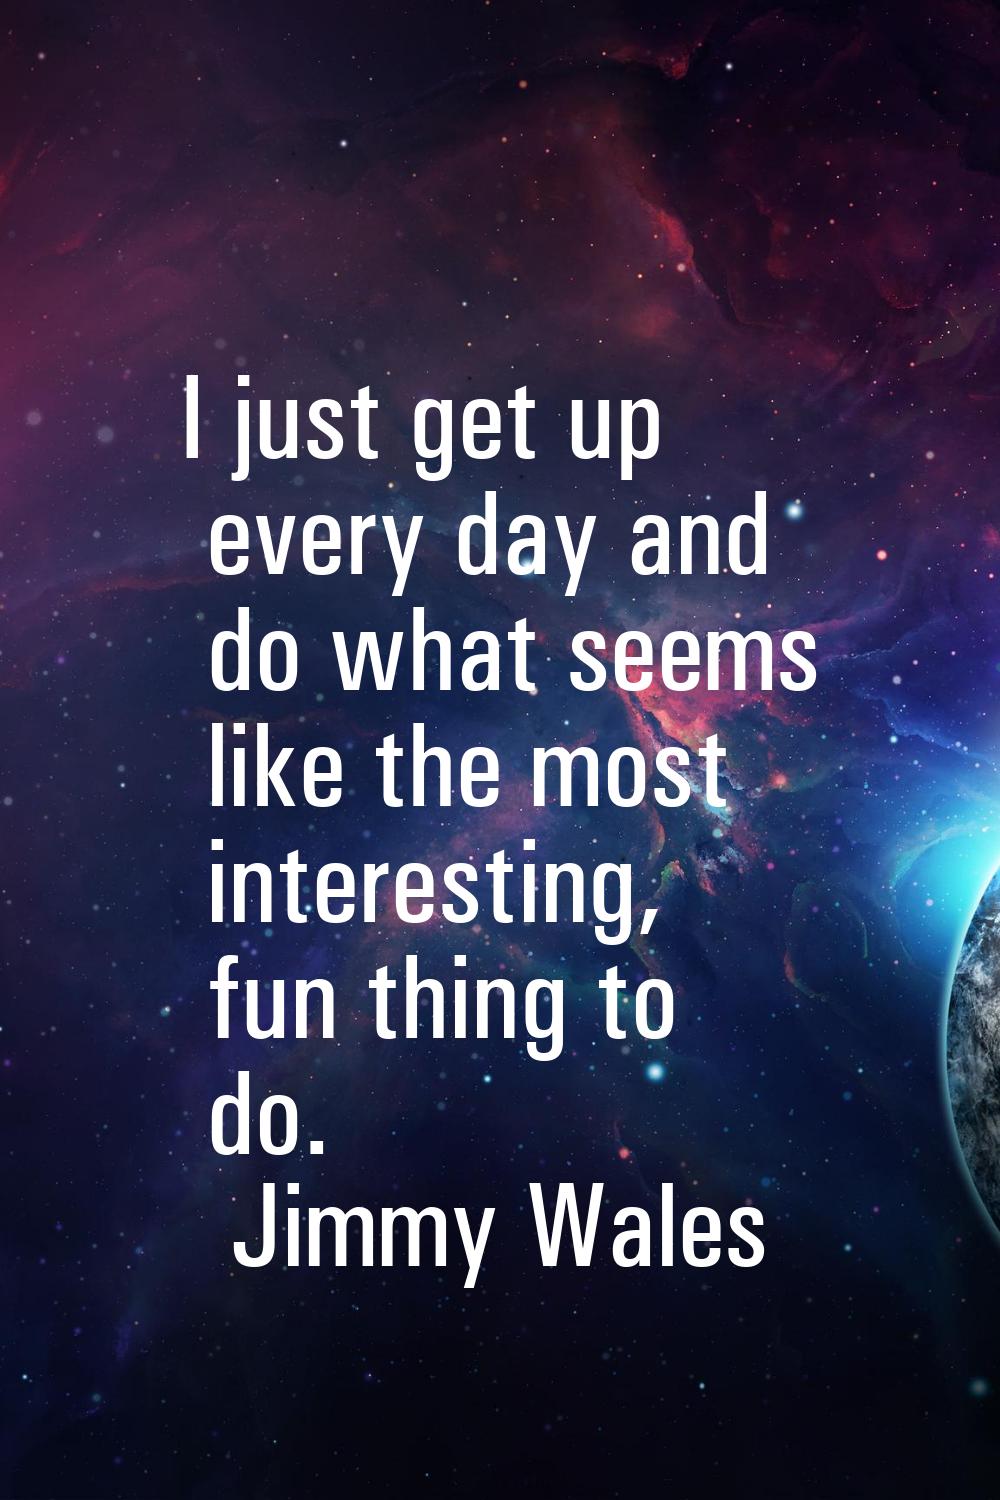 I just get up every day and do what seems like the most interesting, fun thing to do.